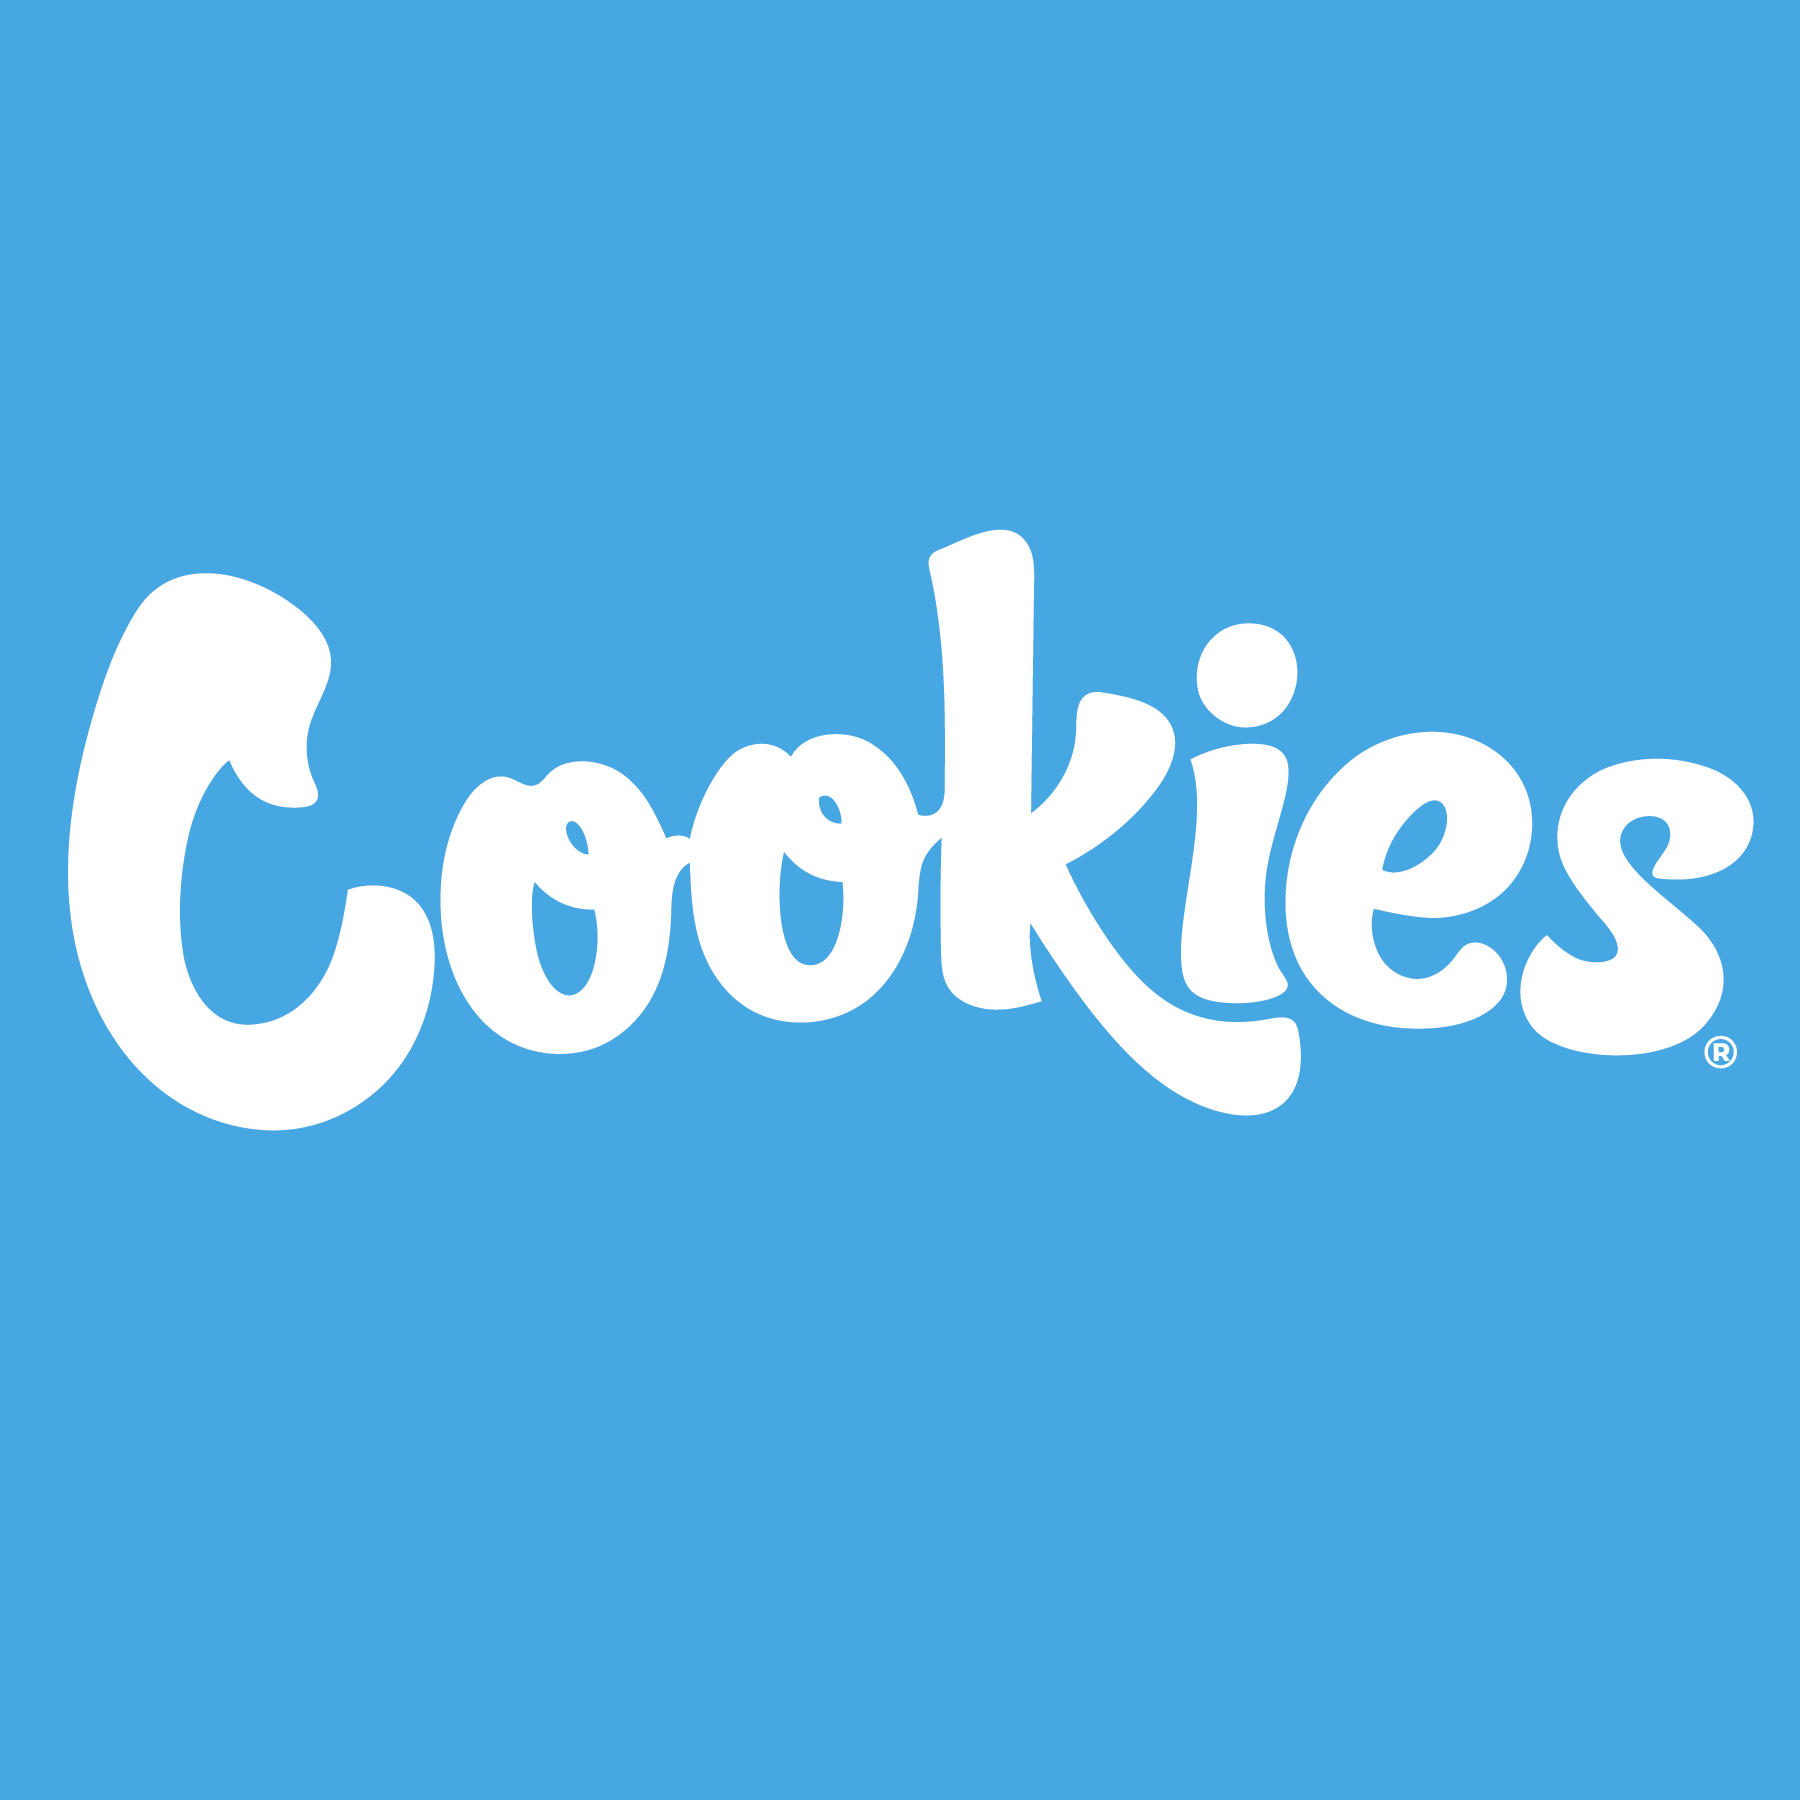 Cookies White text on blue background